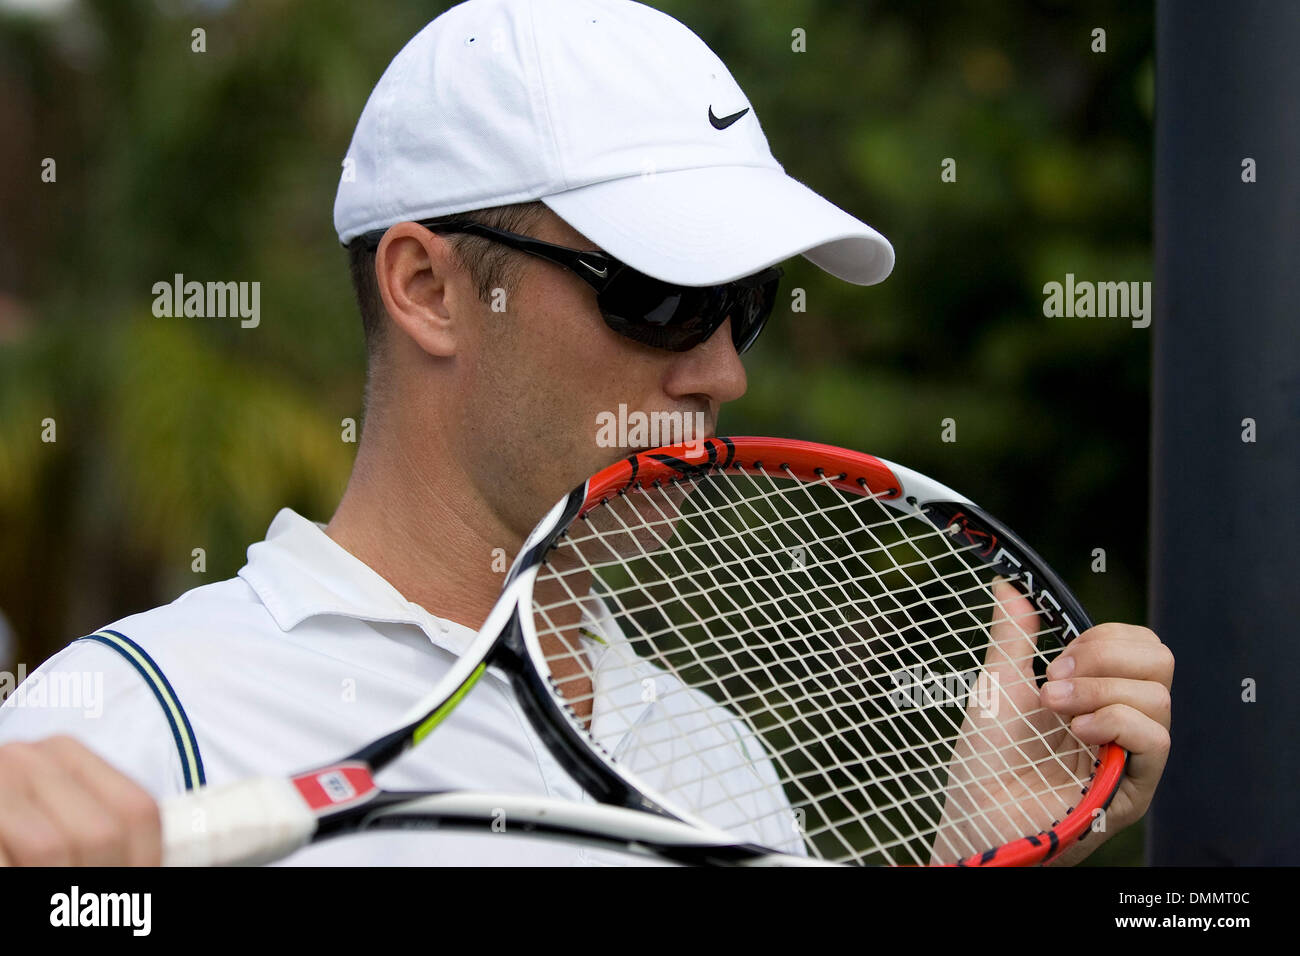 Nov 06, 2009 - Delray Beach, Florida, United States - JEFFREY DONOVAN kisses his racquet at the Boca Raton Resort & Club, during the pro-am hosted by Chris Evert during the 2009 Chris Evert/Raymond James Pro-Celebrity Tennis Classic.   (Credit Image: © Susan Mullane/ZUMA Press) Stock Photo